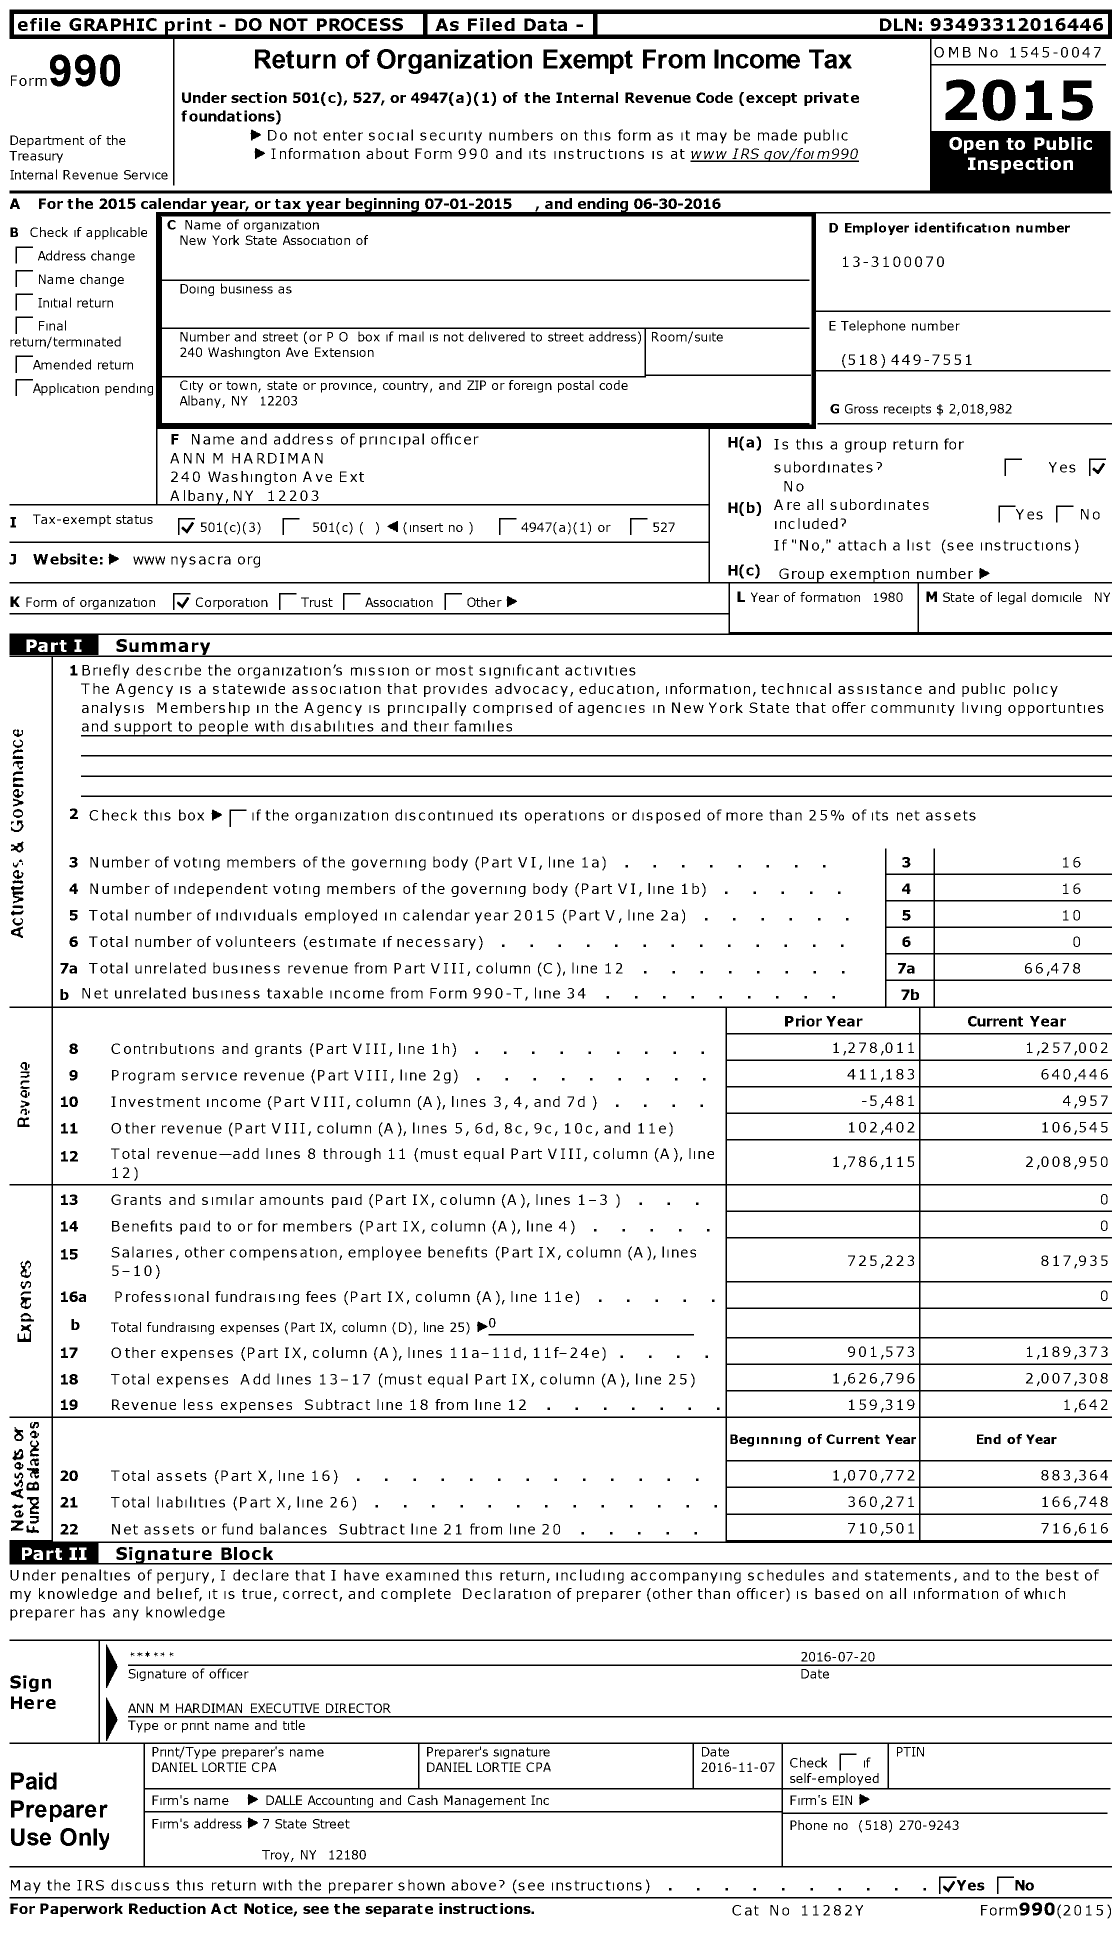 Image of first page of 2015 Form 990 for New York Alliance for Inclusion and Innovation (NYSACRA)